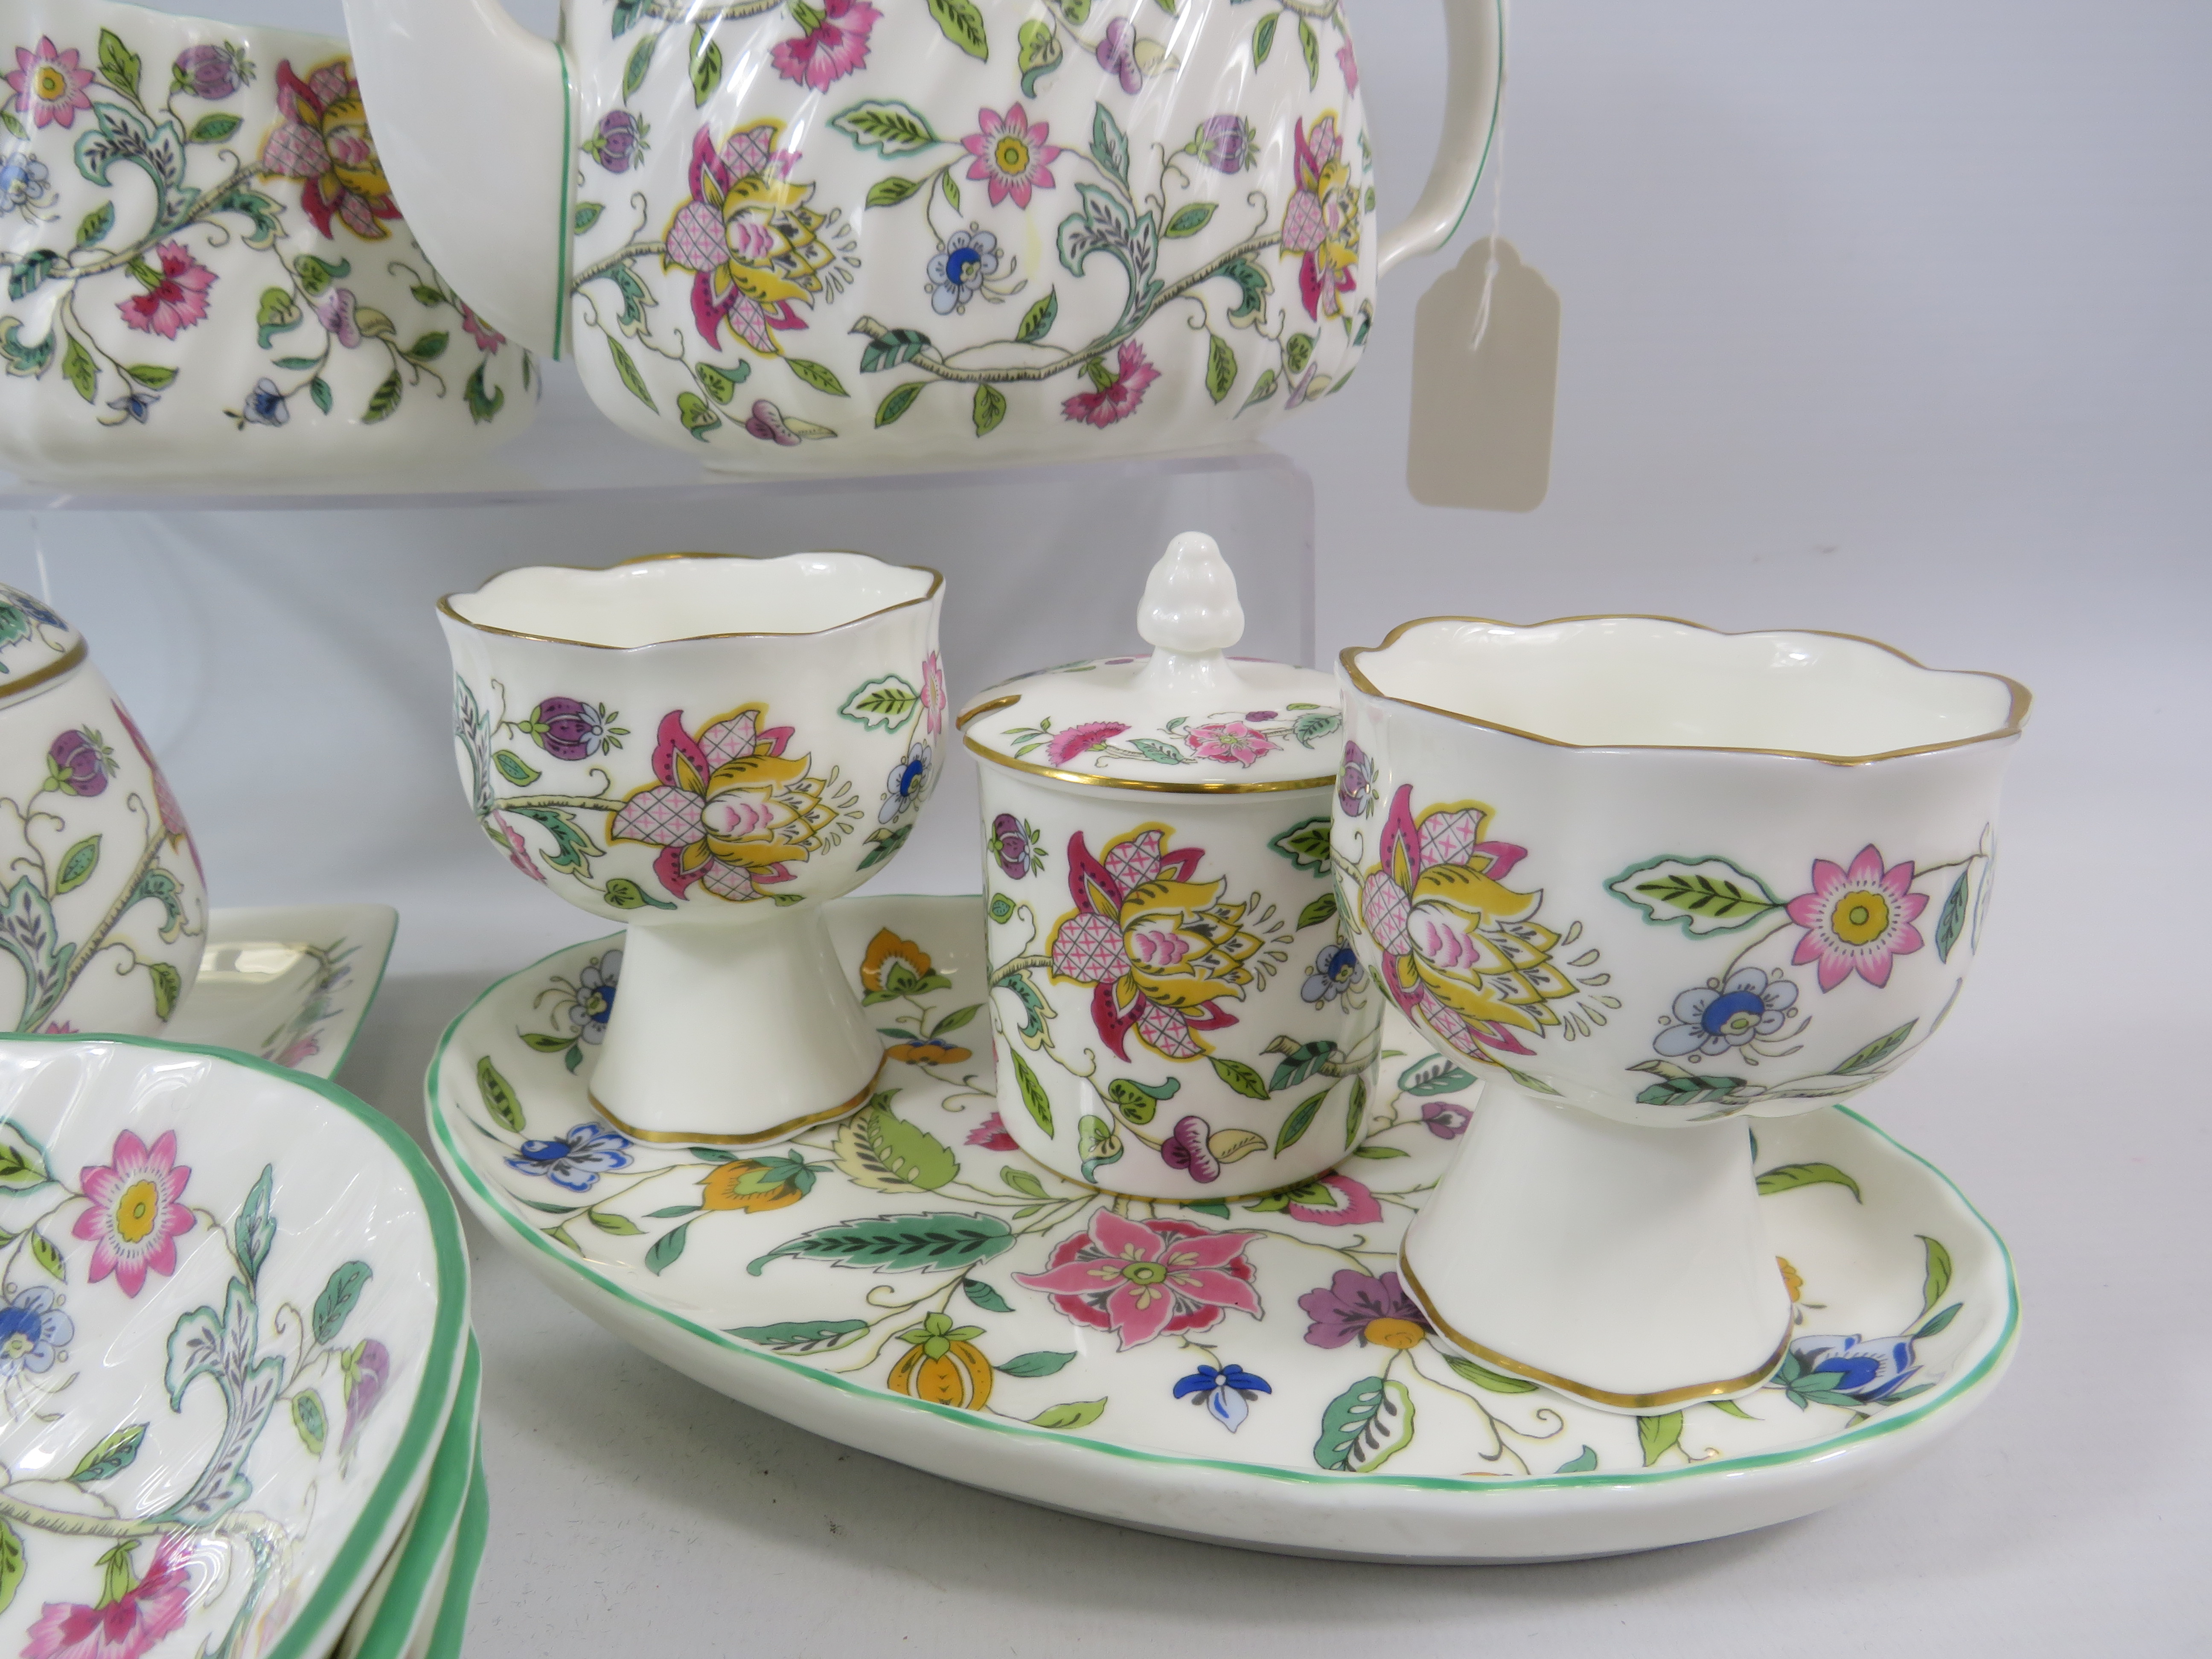 13 Pieces of Minton Haddon hall including teapot, bowls, lidded jars etc. - Image 3 of 4